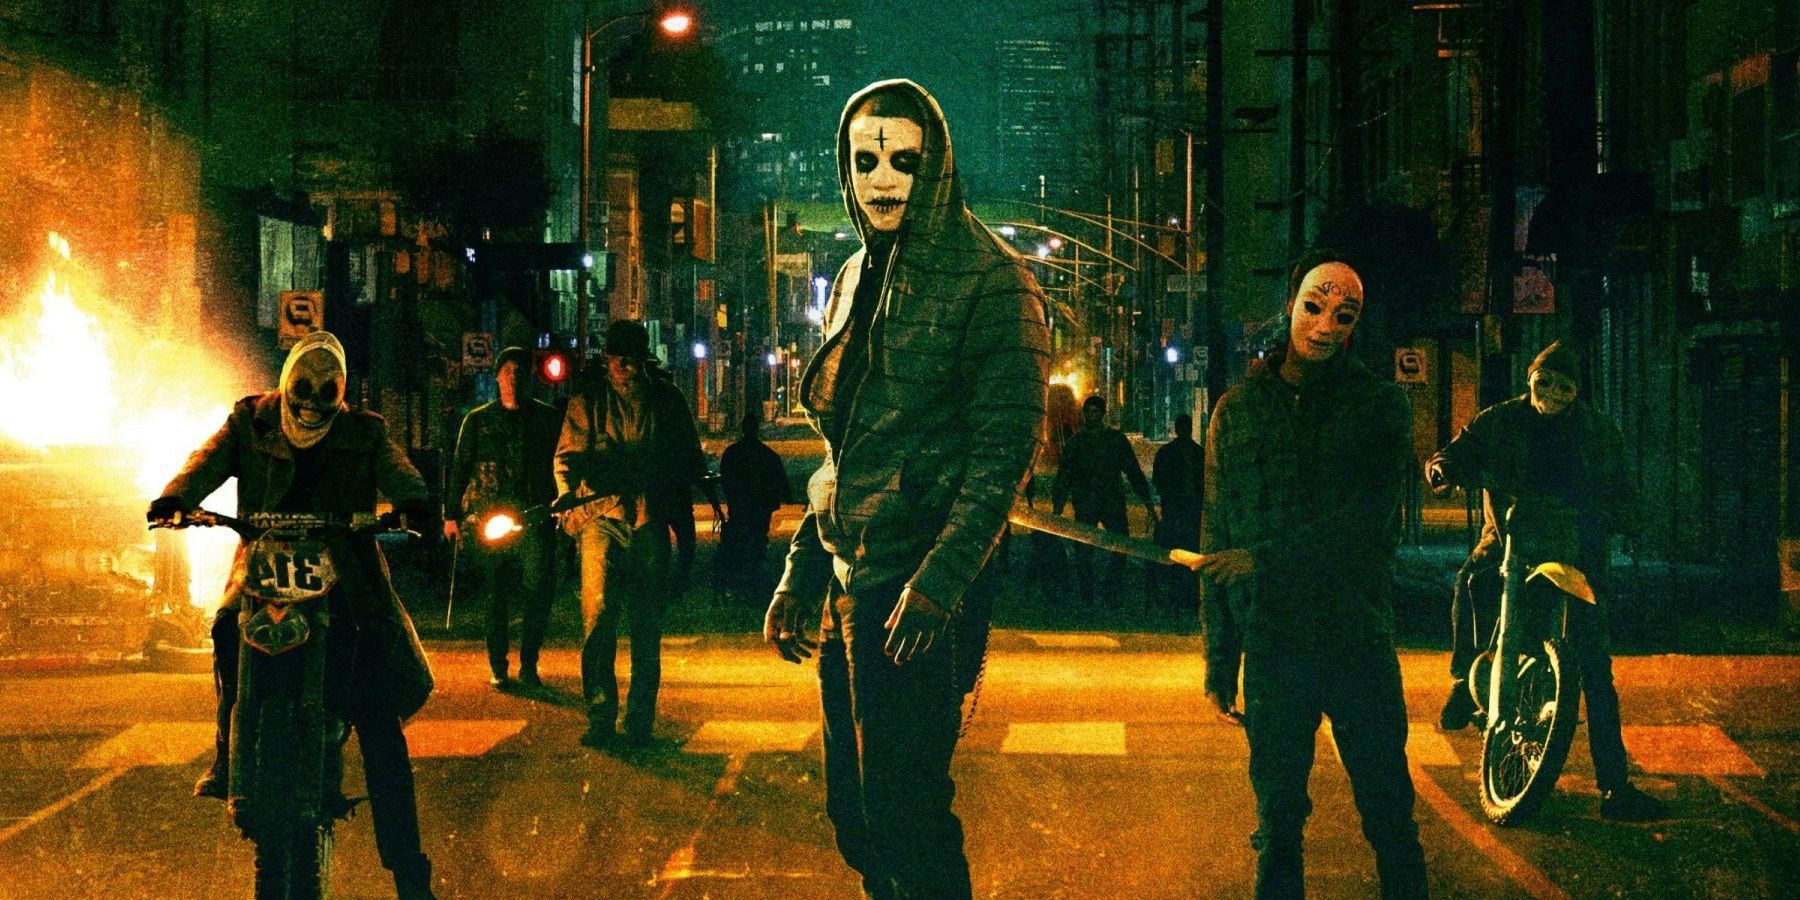 Purgers gather on the street in Purge Anarchy